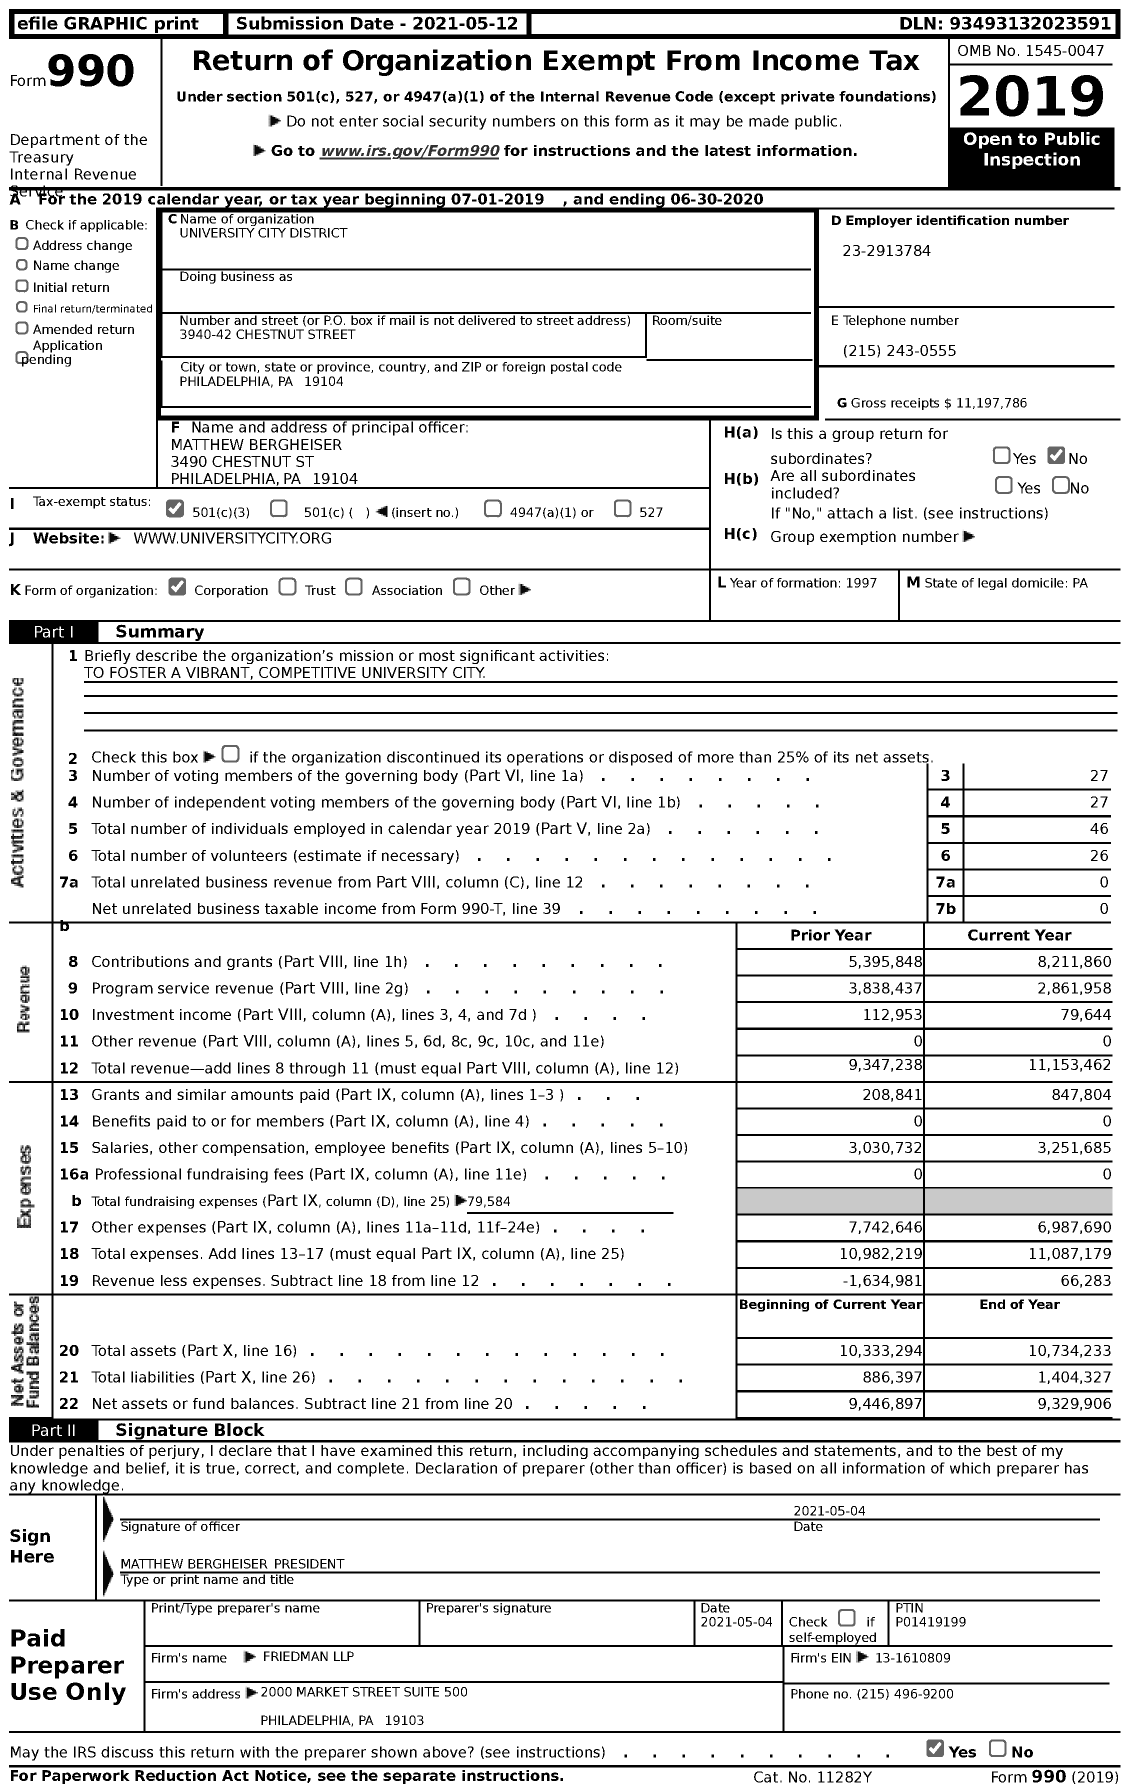 Image of first page of 2019 Form 990 for University City District (UCD)